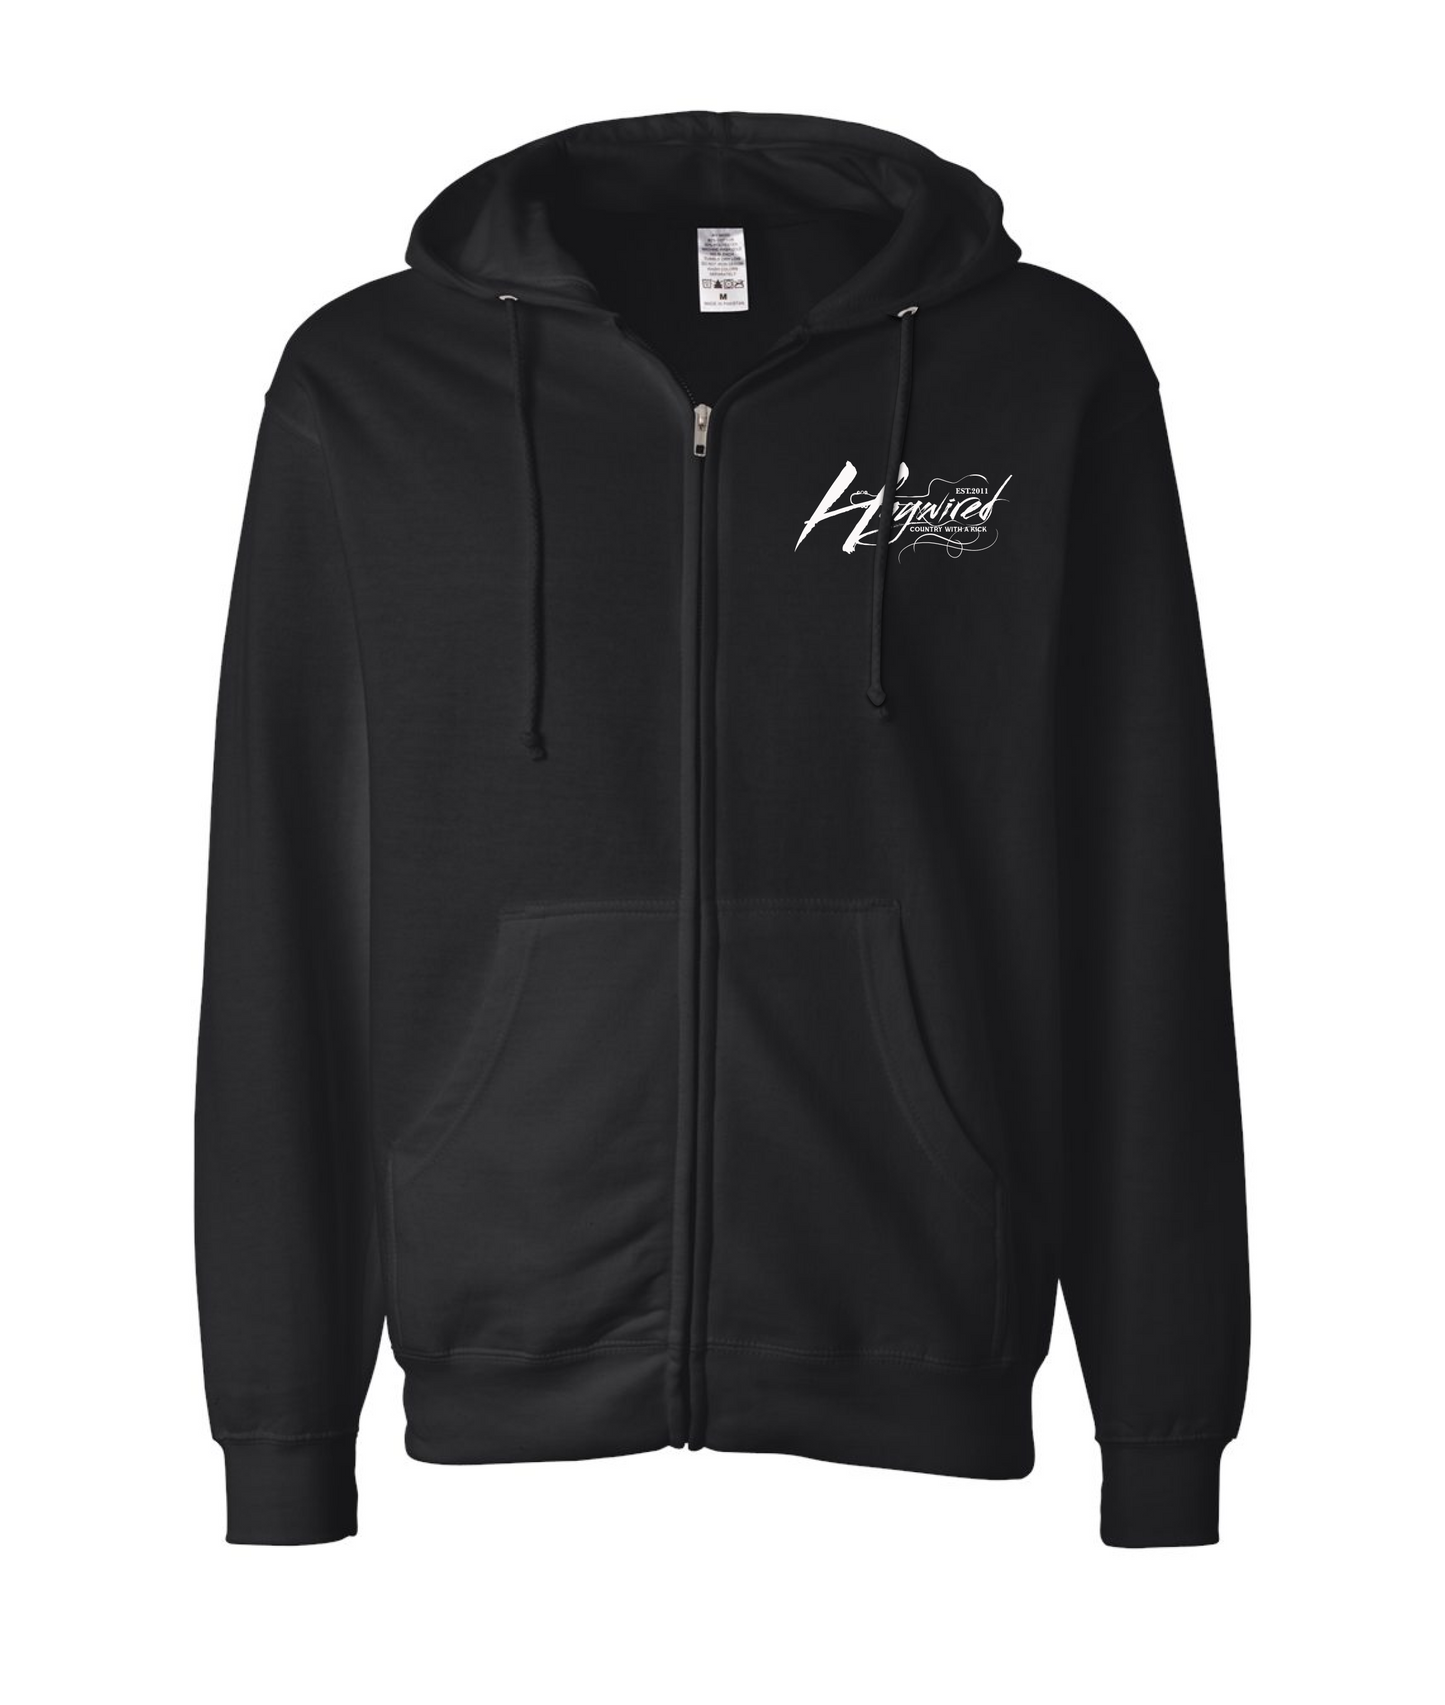 Haywired - Country With a Kick Logo - Black Zip Hoodie